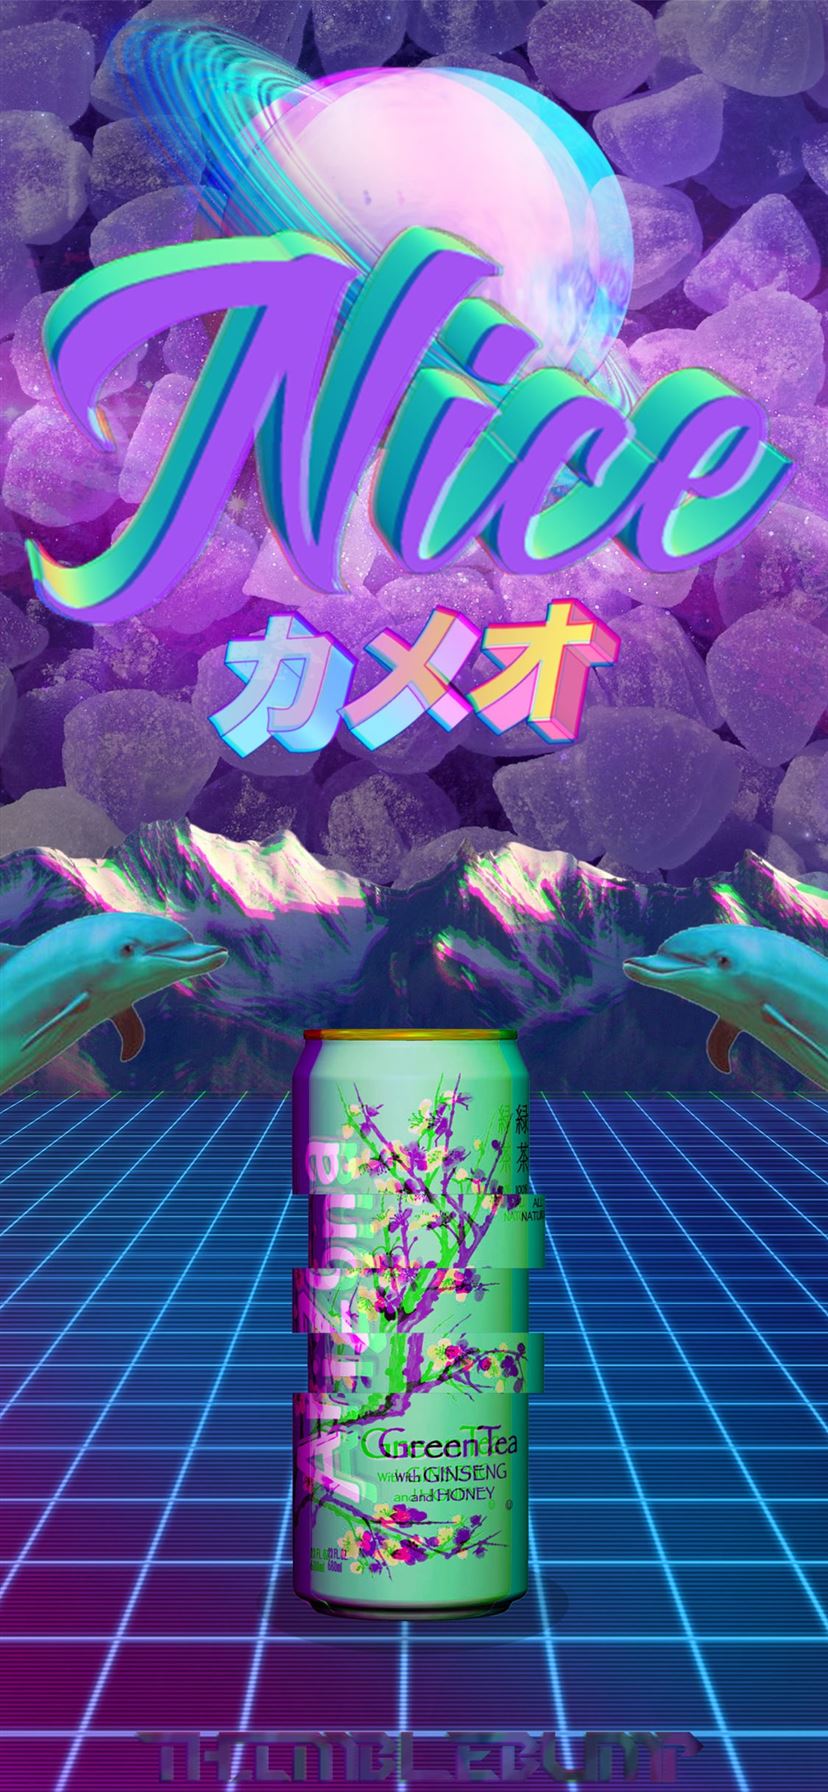 Vaporwave Tag Iphone Wallpapers Free Download